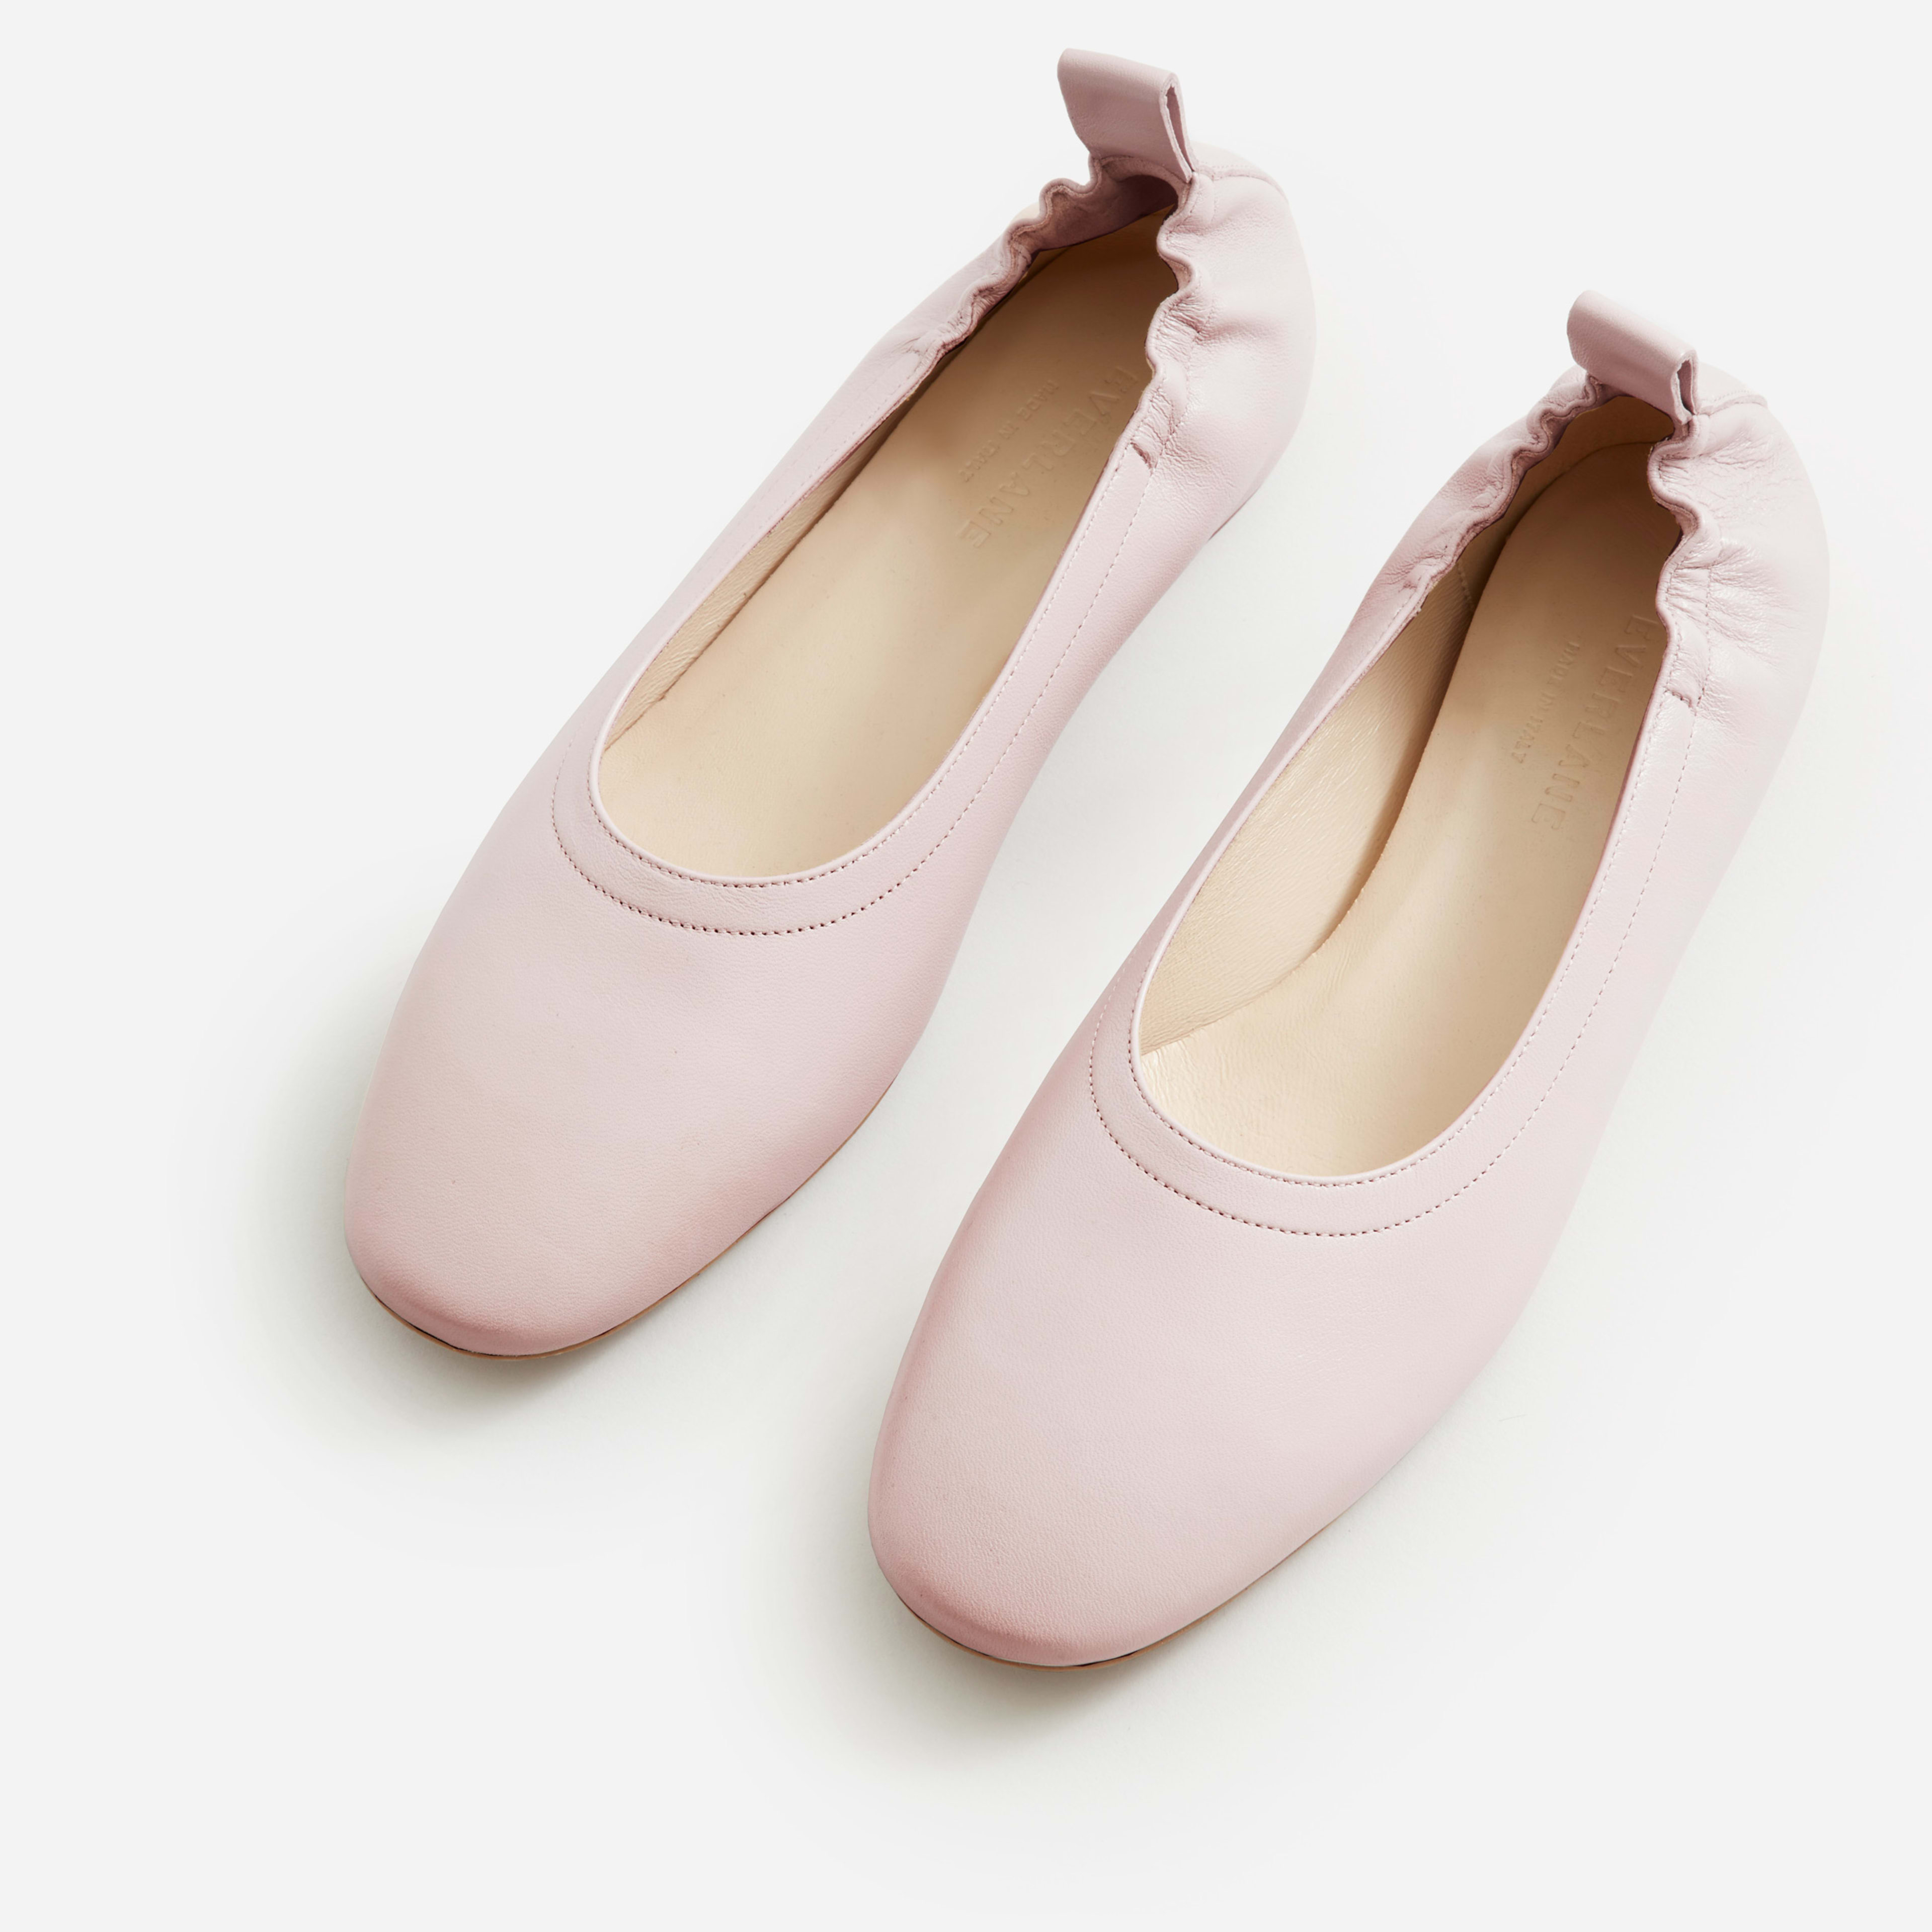 The Day Flat Pale Rose – Everlane